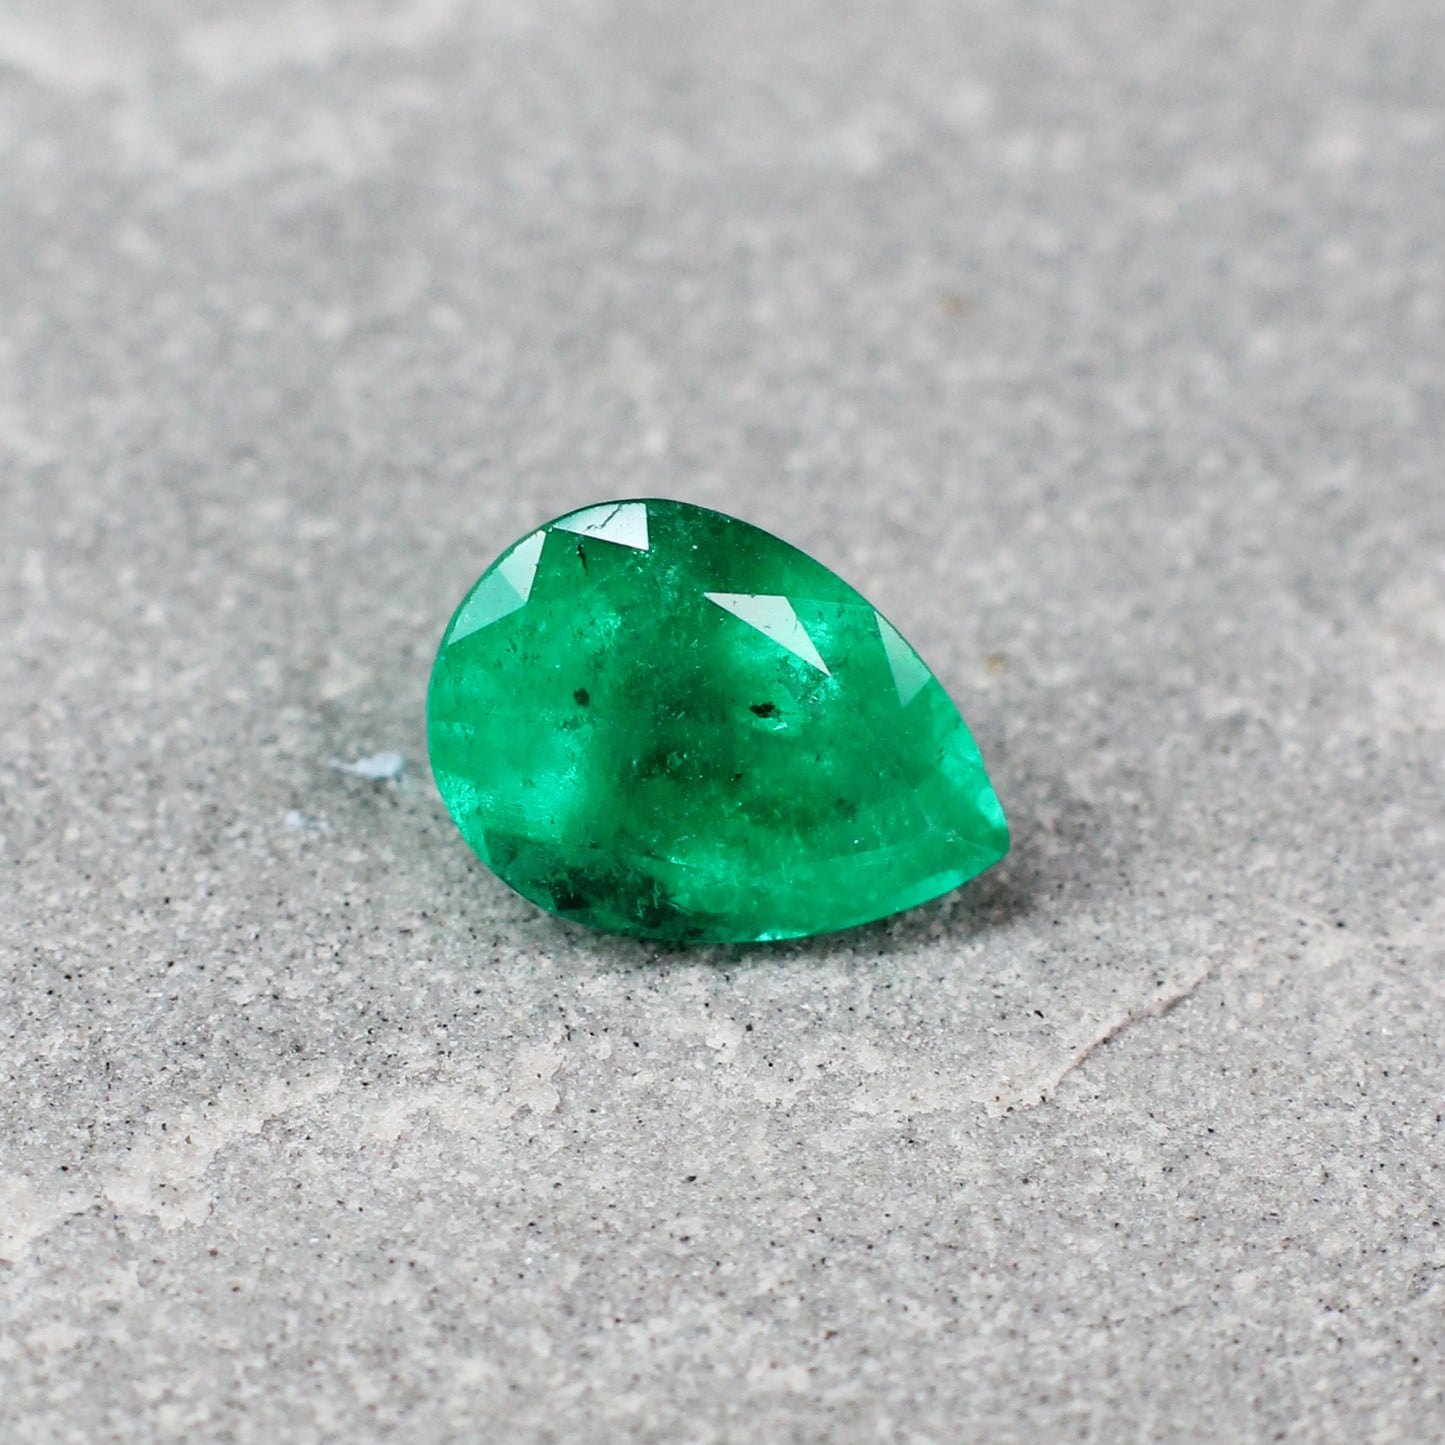 1.73ct Pear Shape Emerald, Moderate Oil, Colombia - 9.60 x 6.86 x 5.14mm